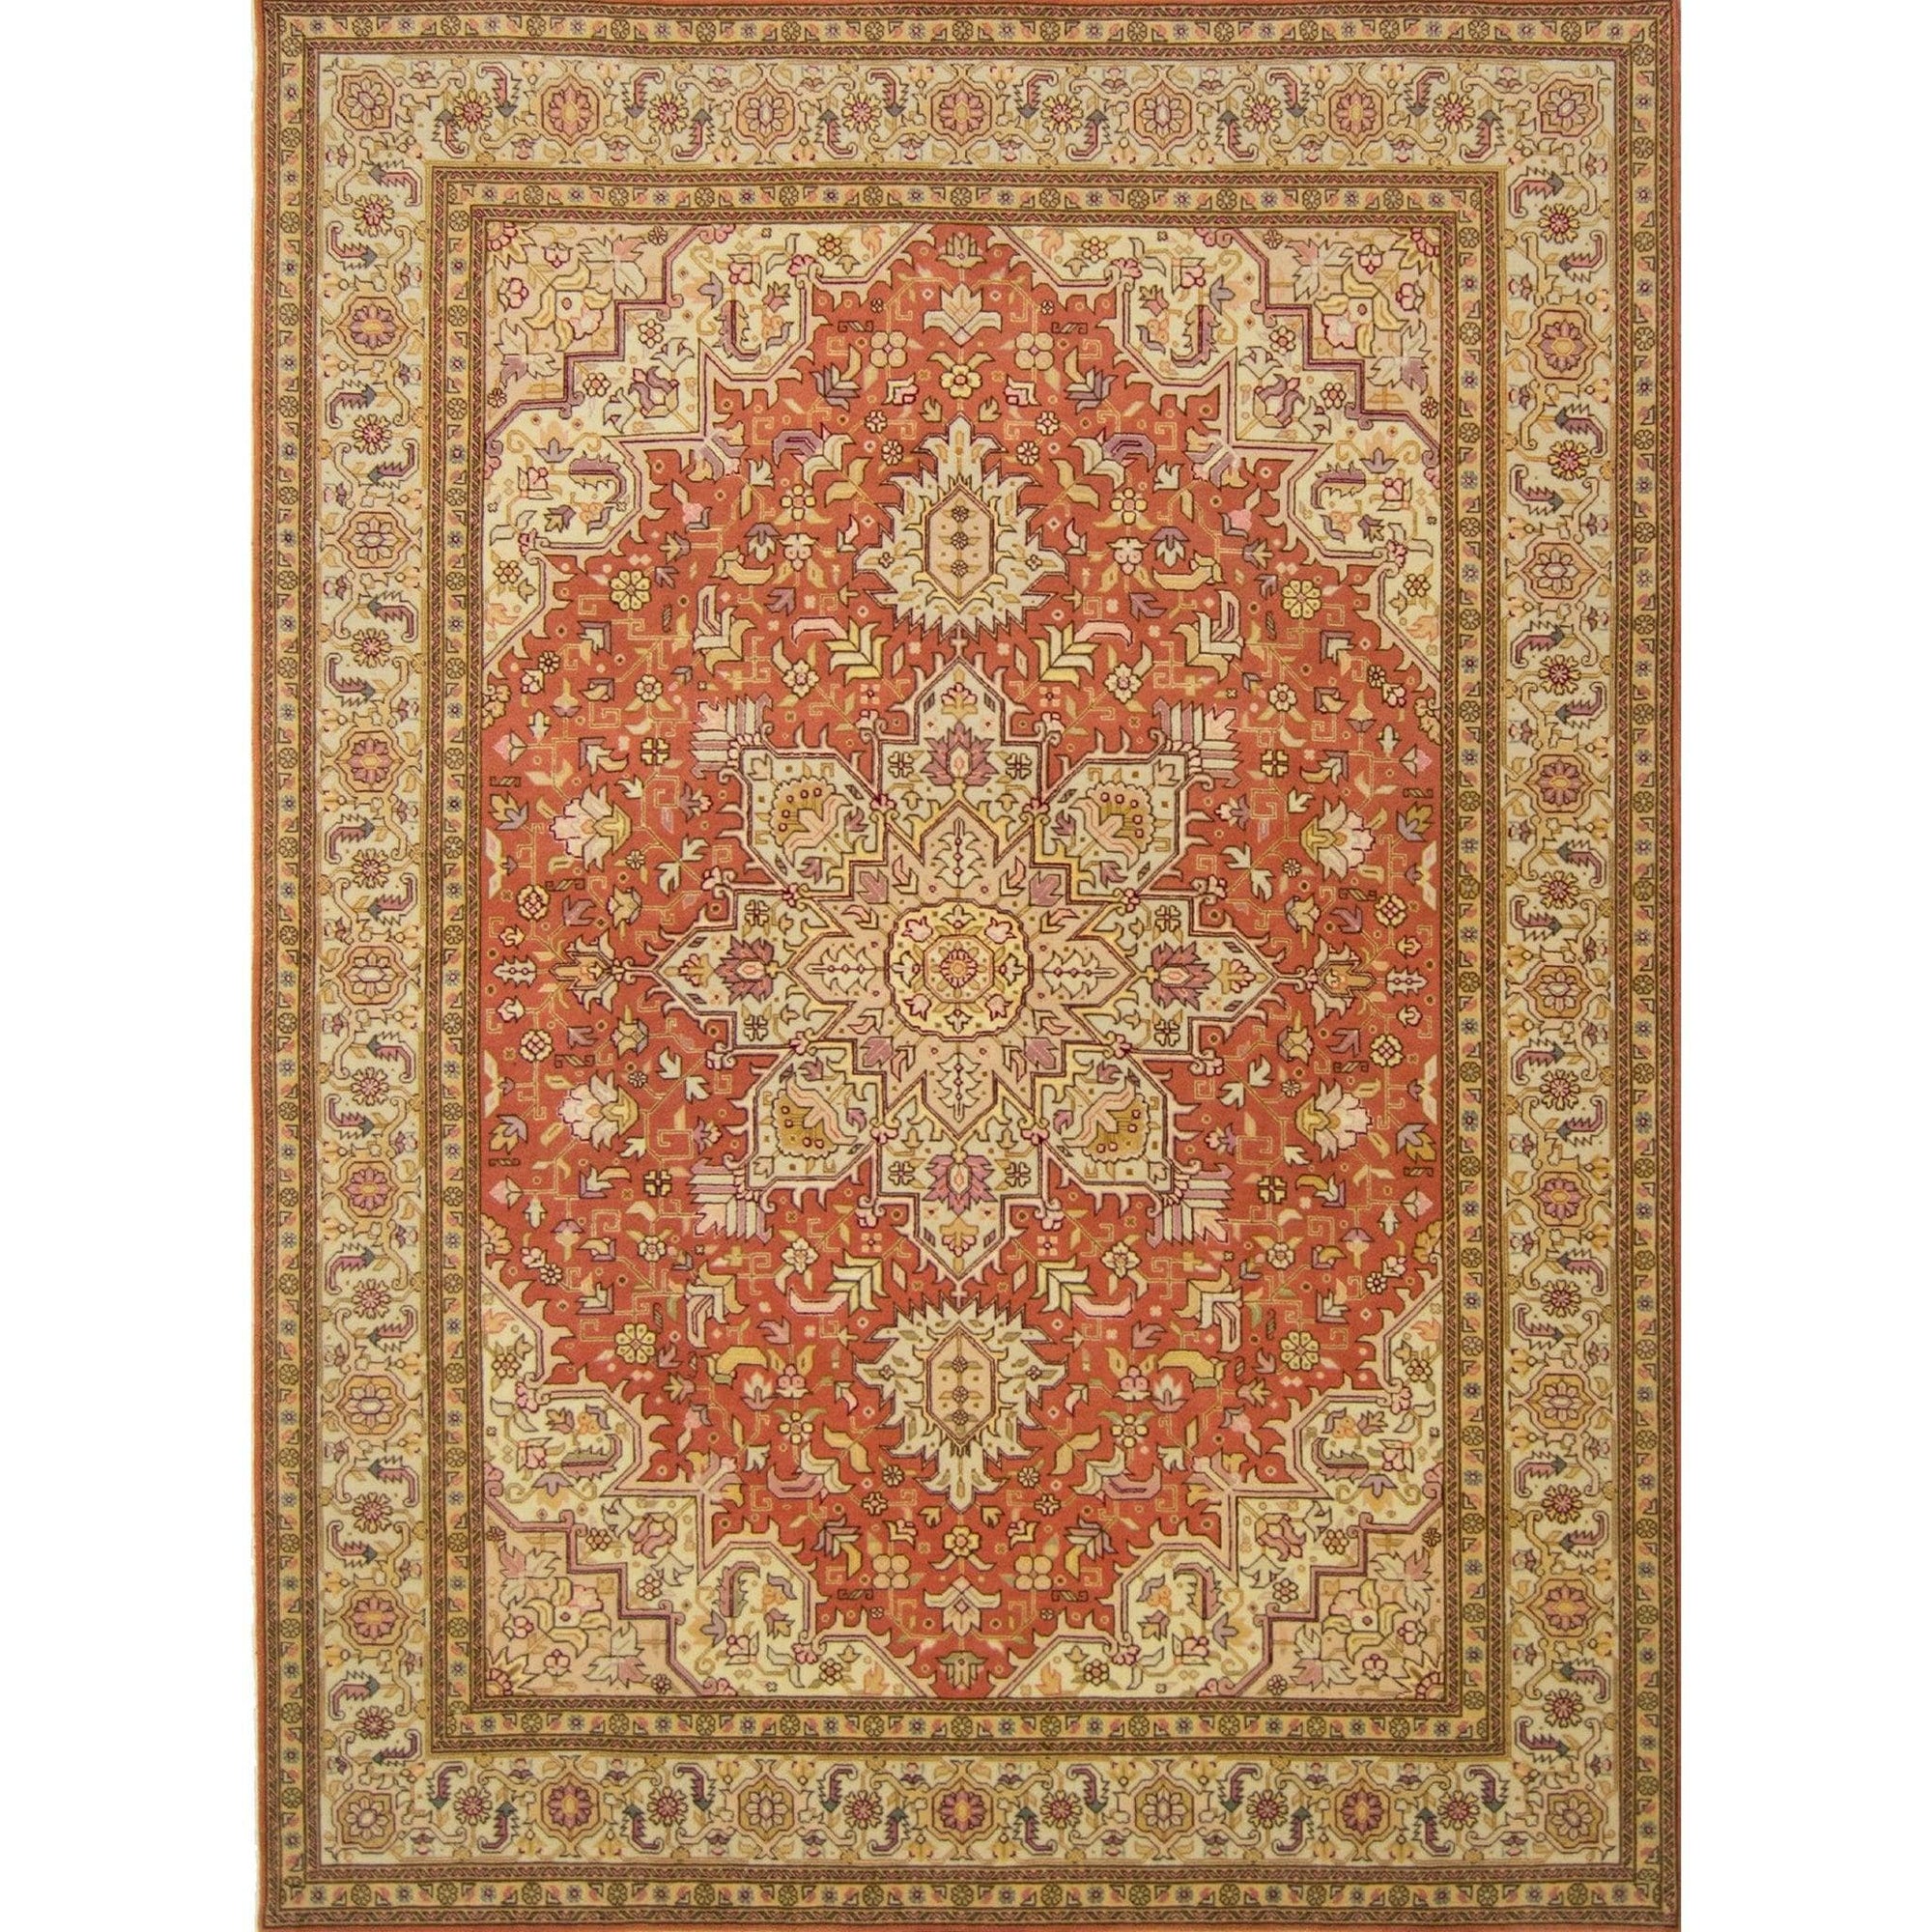 Super Fine Hand-knotted Wool and Silk Tabriz Persian Rug 150cm x 210cm